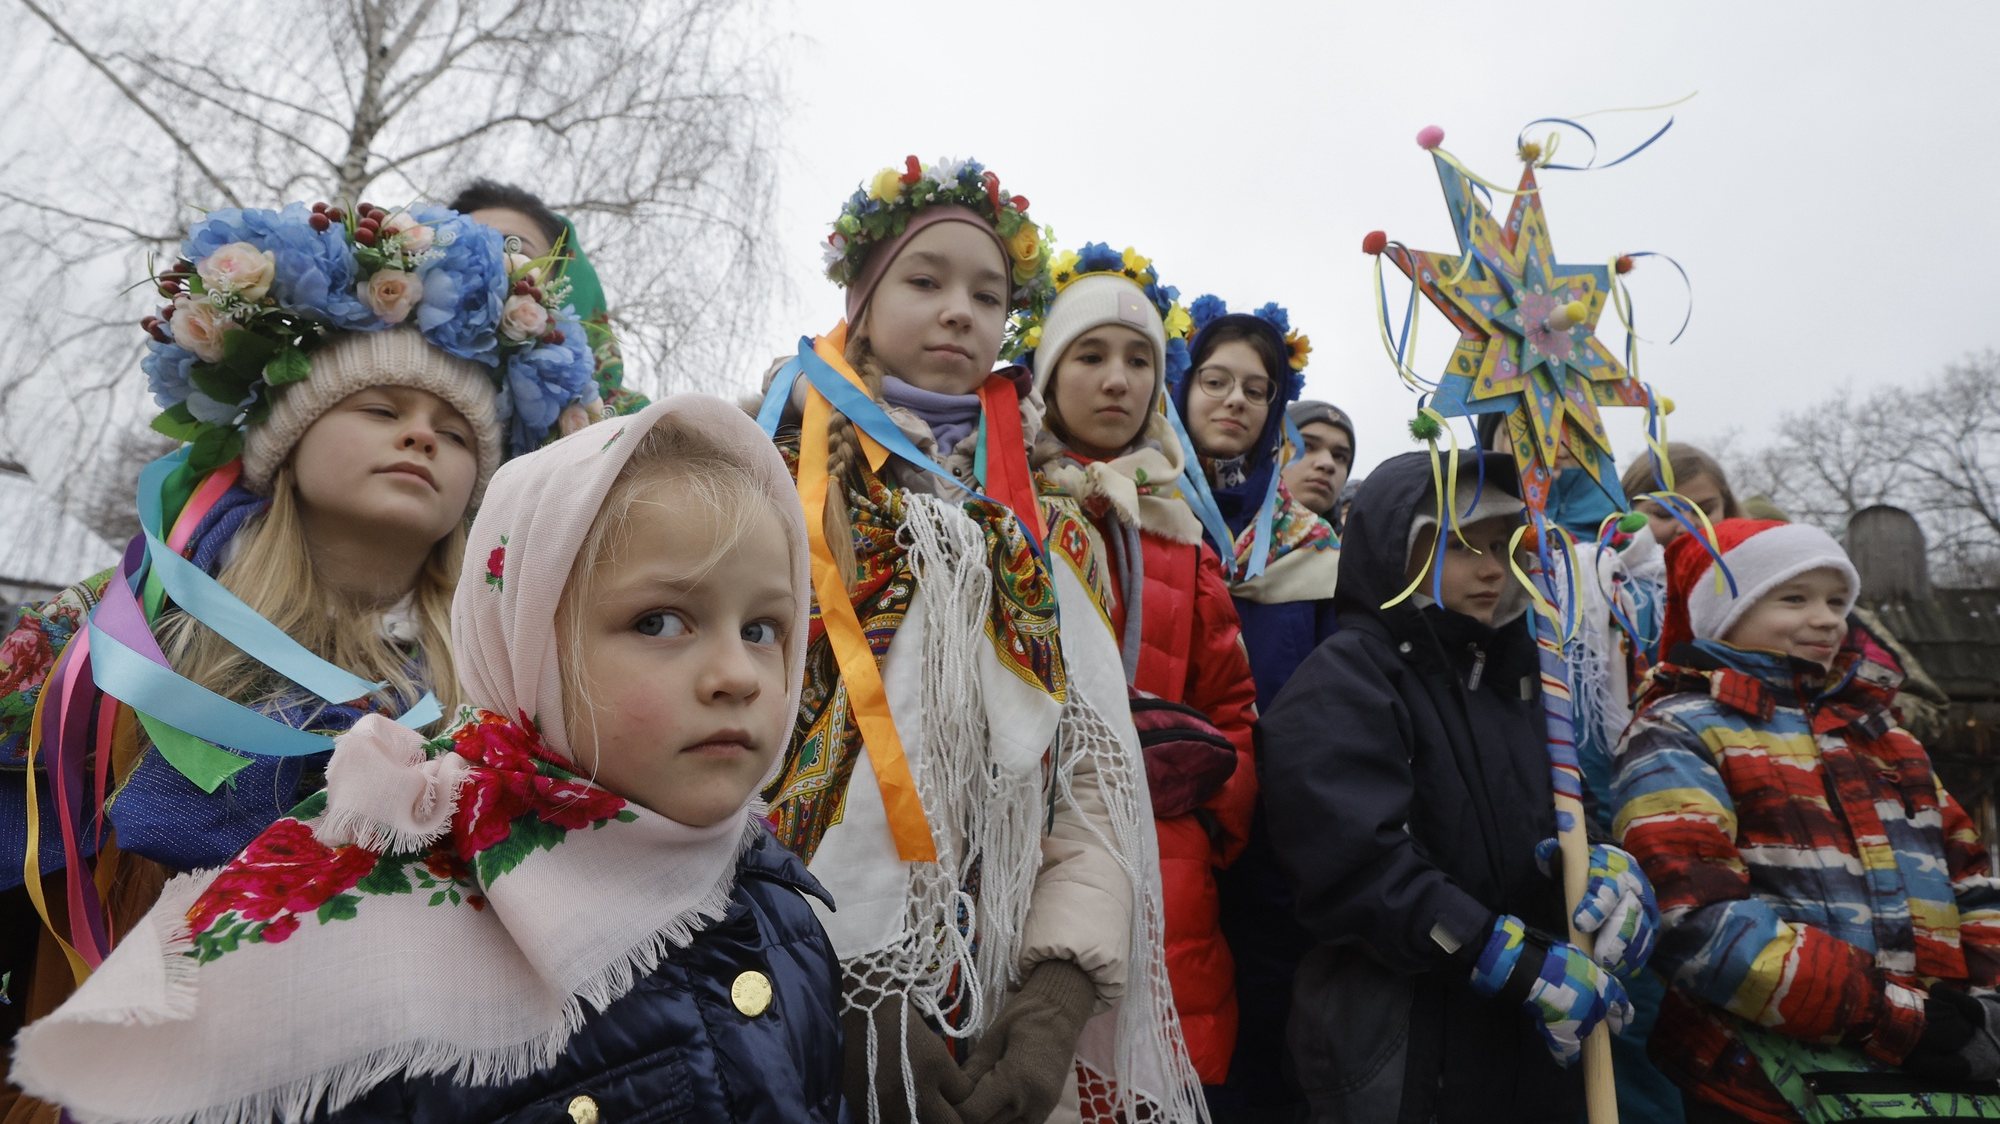 epa11044034 Ukrainian children wearing traditional attire sing Christmas carols as they walk from house to house in Pyrogovo village, near Kyiv (Kiev), Ukraine, 25 December 2023, amid the Russian invasion. Ukraine celebrates Christmas on 25 December for the first time this year, in accordance with the Western calendar. Ukrainian President Zelensky signed a law in July to move the official Christmas Day holiday to 25 December, departing from the Russian Orthodox Church tradition of celebrating on 07 January. Russian troops entered Ukraine on 24 February 2022 starting a conflict that has provoked destruction and a humanitarian crisis.  EPA/SERGEY DOLZHENKO